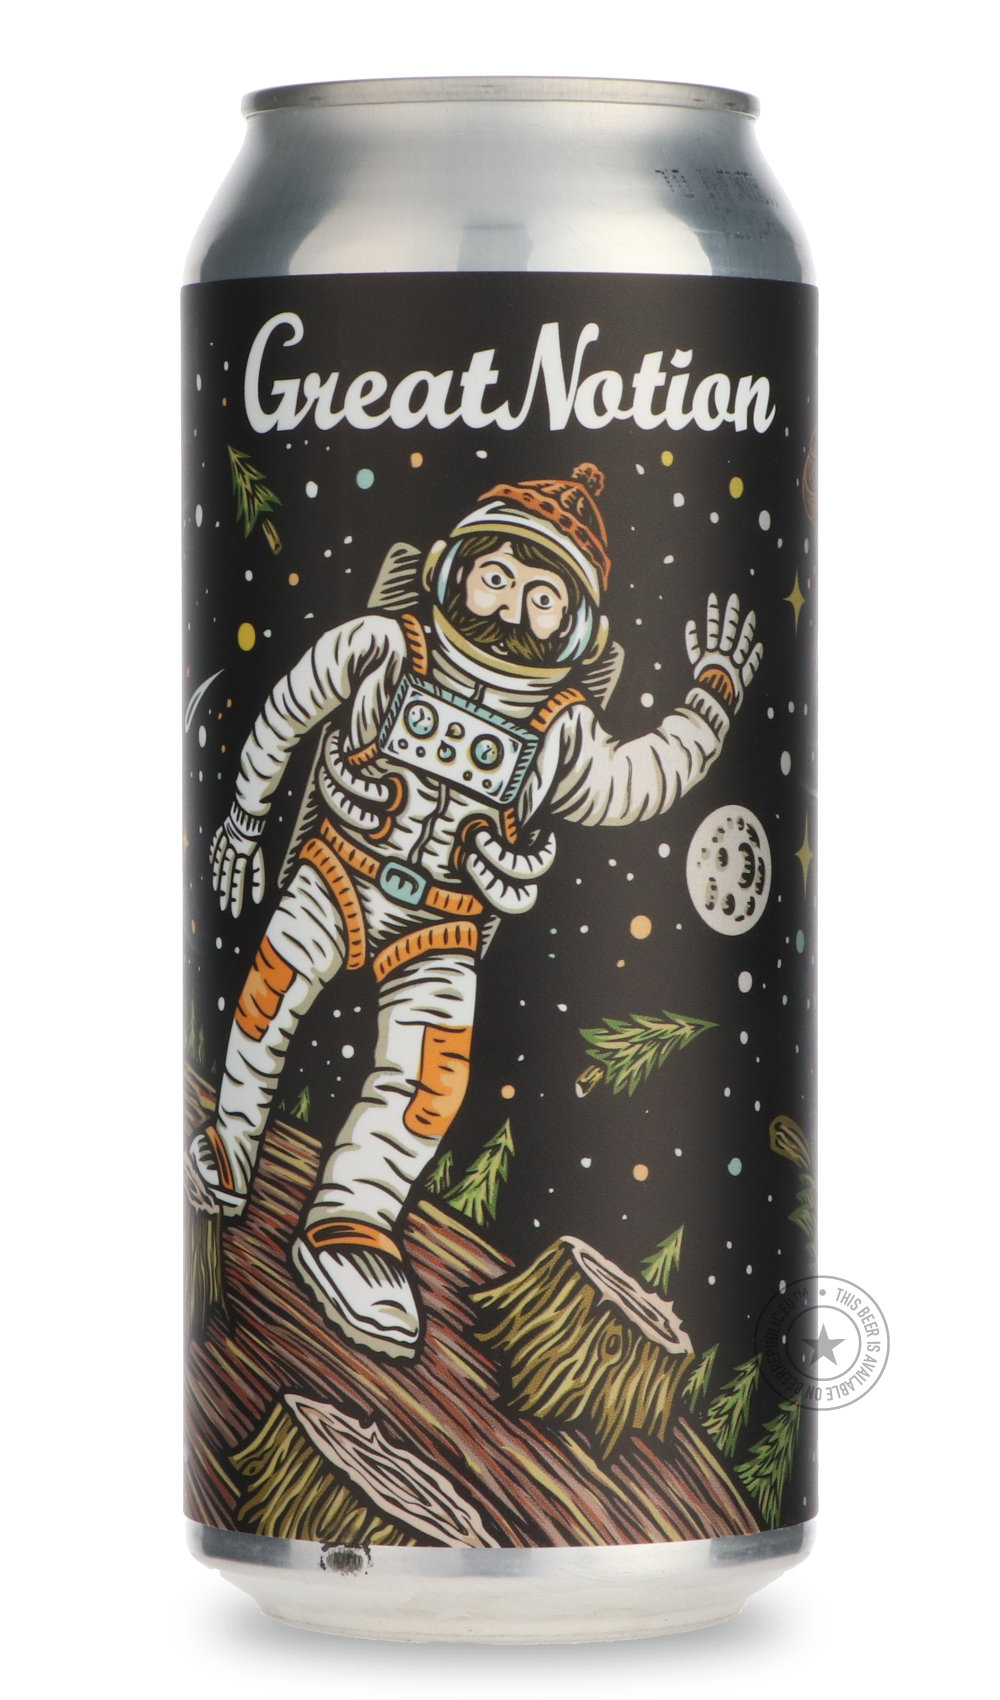 -Great Notion- Return to Space-IPA- Only @ Beer Republic - The best online beer store for American & Canadian craft beer - Buy beer online from the USA and Canada - Bier online kopen - Amerikaans bier kopen - Craft beer store - Craft beer kopen - Amerikanisch bier kaufen - Bier online kaufen - Acheter biere online - IPA - Stout - Porter - New England IPA - Hazy IPA - Imperial Stout - Barrel Aged - Barrel Aged Imperial Stout - Brown - Dark beer - Blond - Blonde - Pilsner - Lager - Wheat - Weizen - Amber - Ba